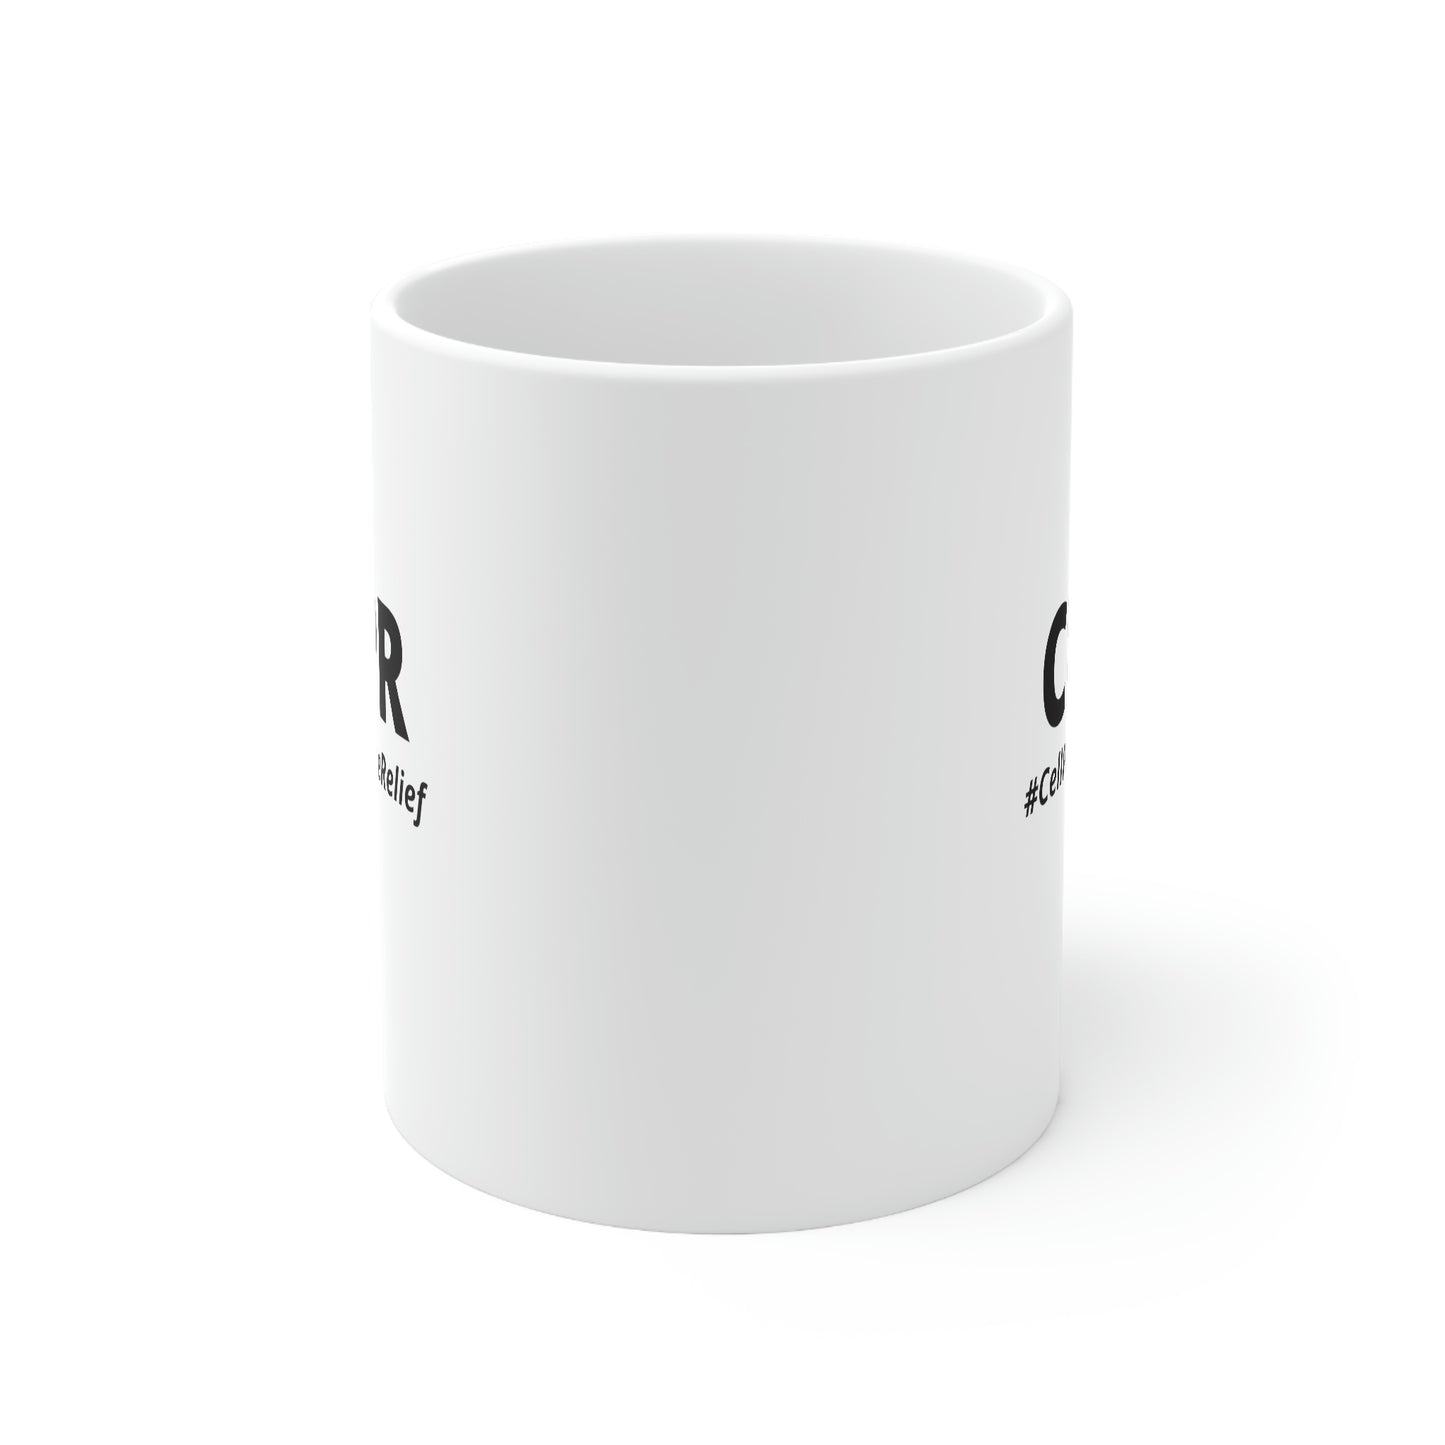 CPR (Cell Phone Relief) Mug